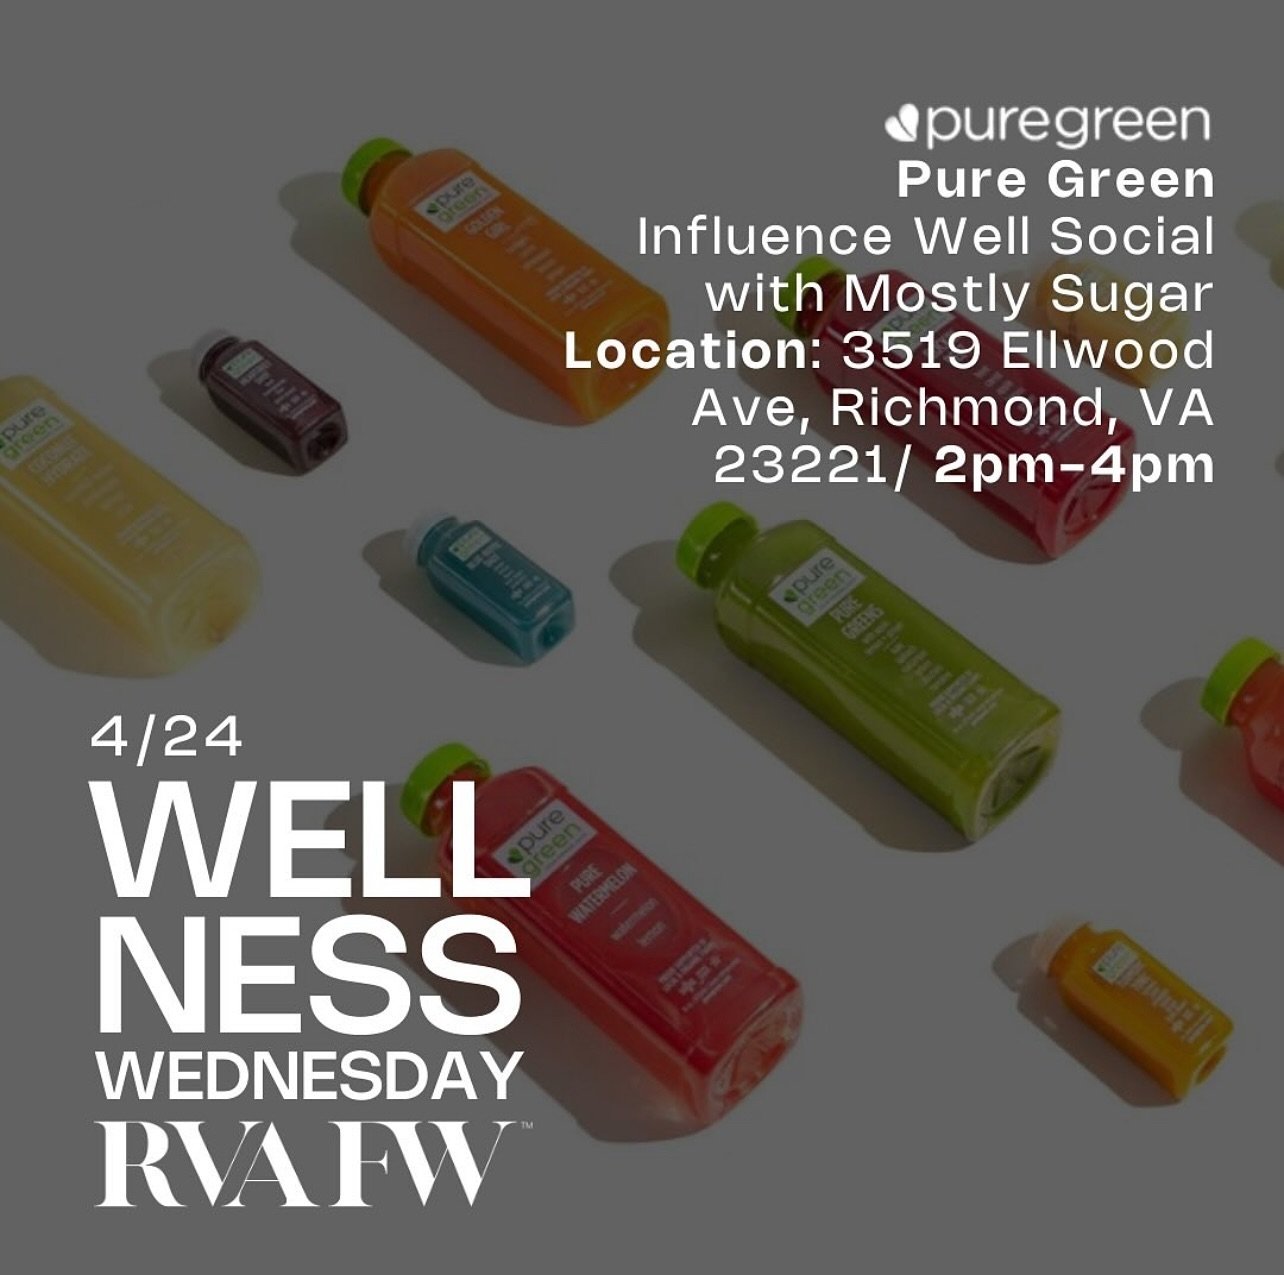 Let&rsquo;s have a conversation about wellness.

We will be at @puregreenrva from 2-4PM today for the Influence Well Social where we will be discussing all things related to our wellbeing and capturing feel good content. The first 15 people to arrive